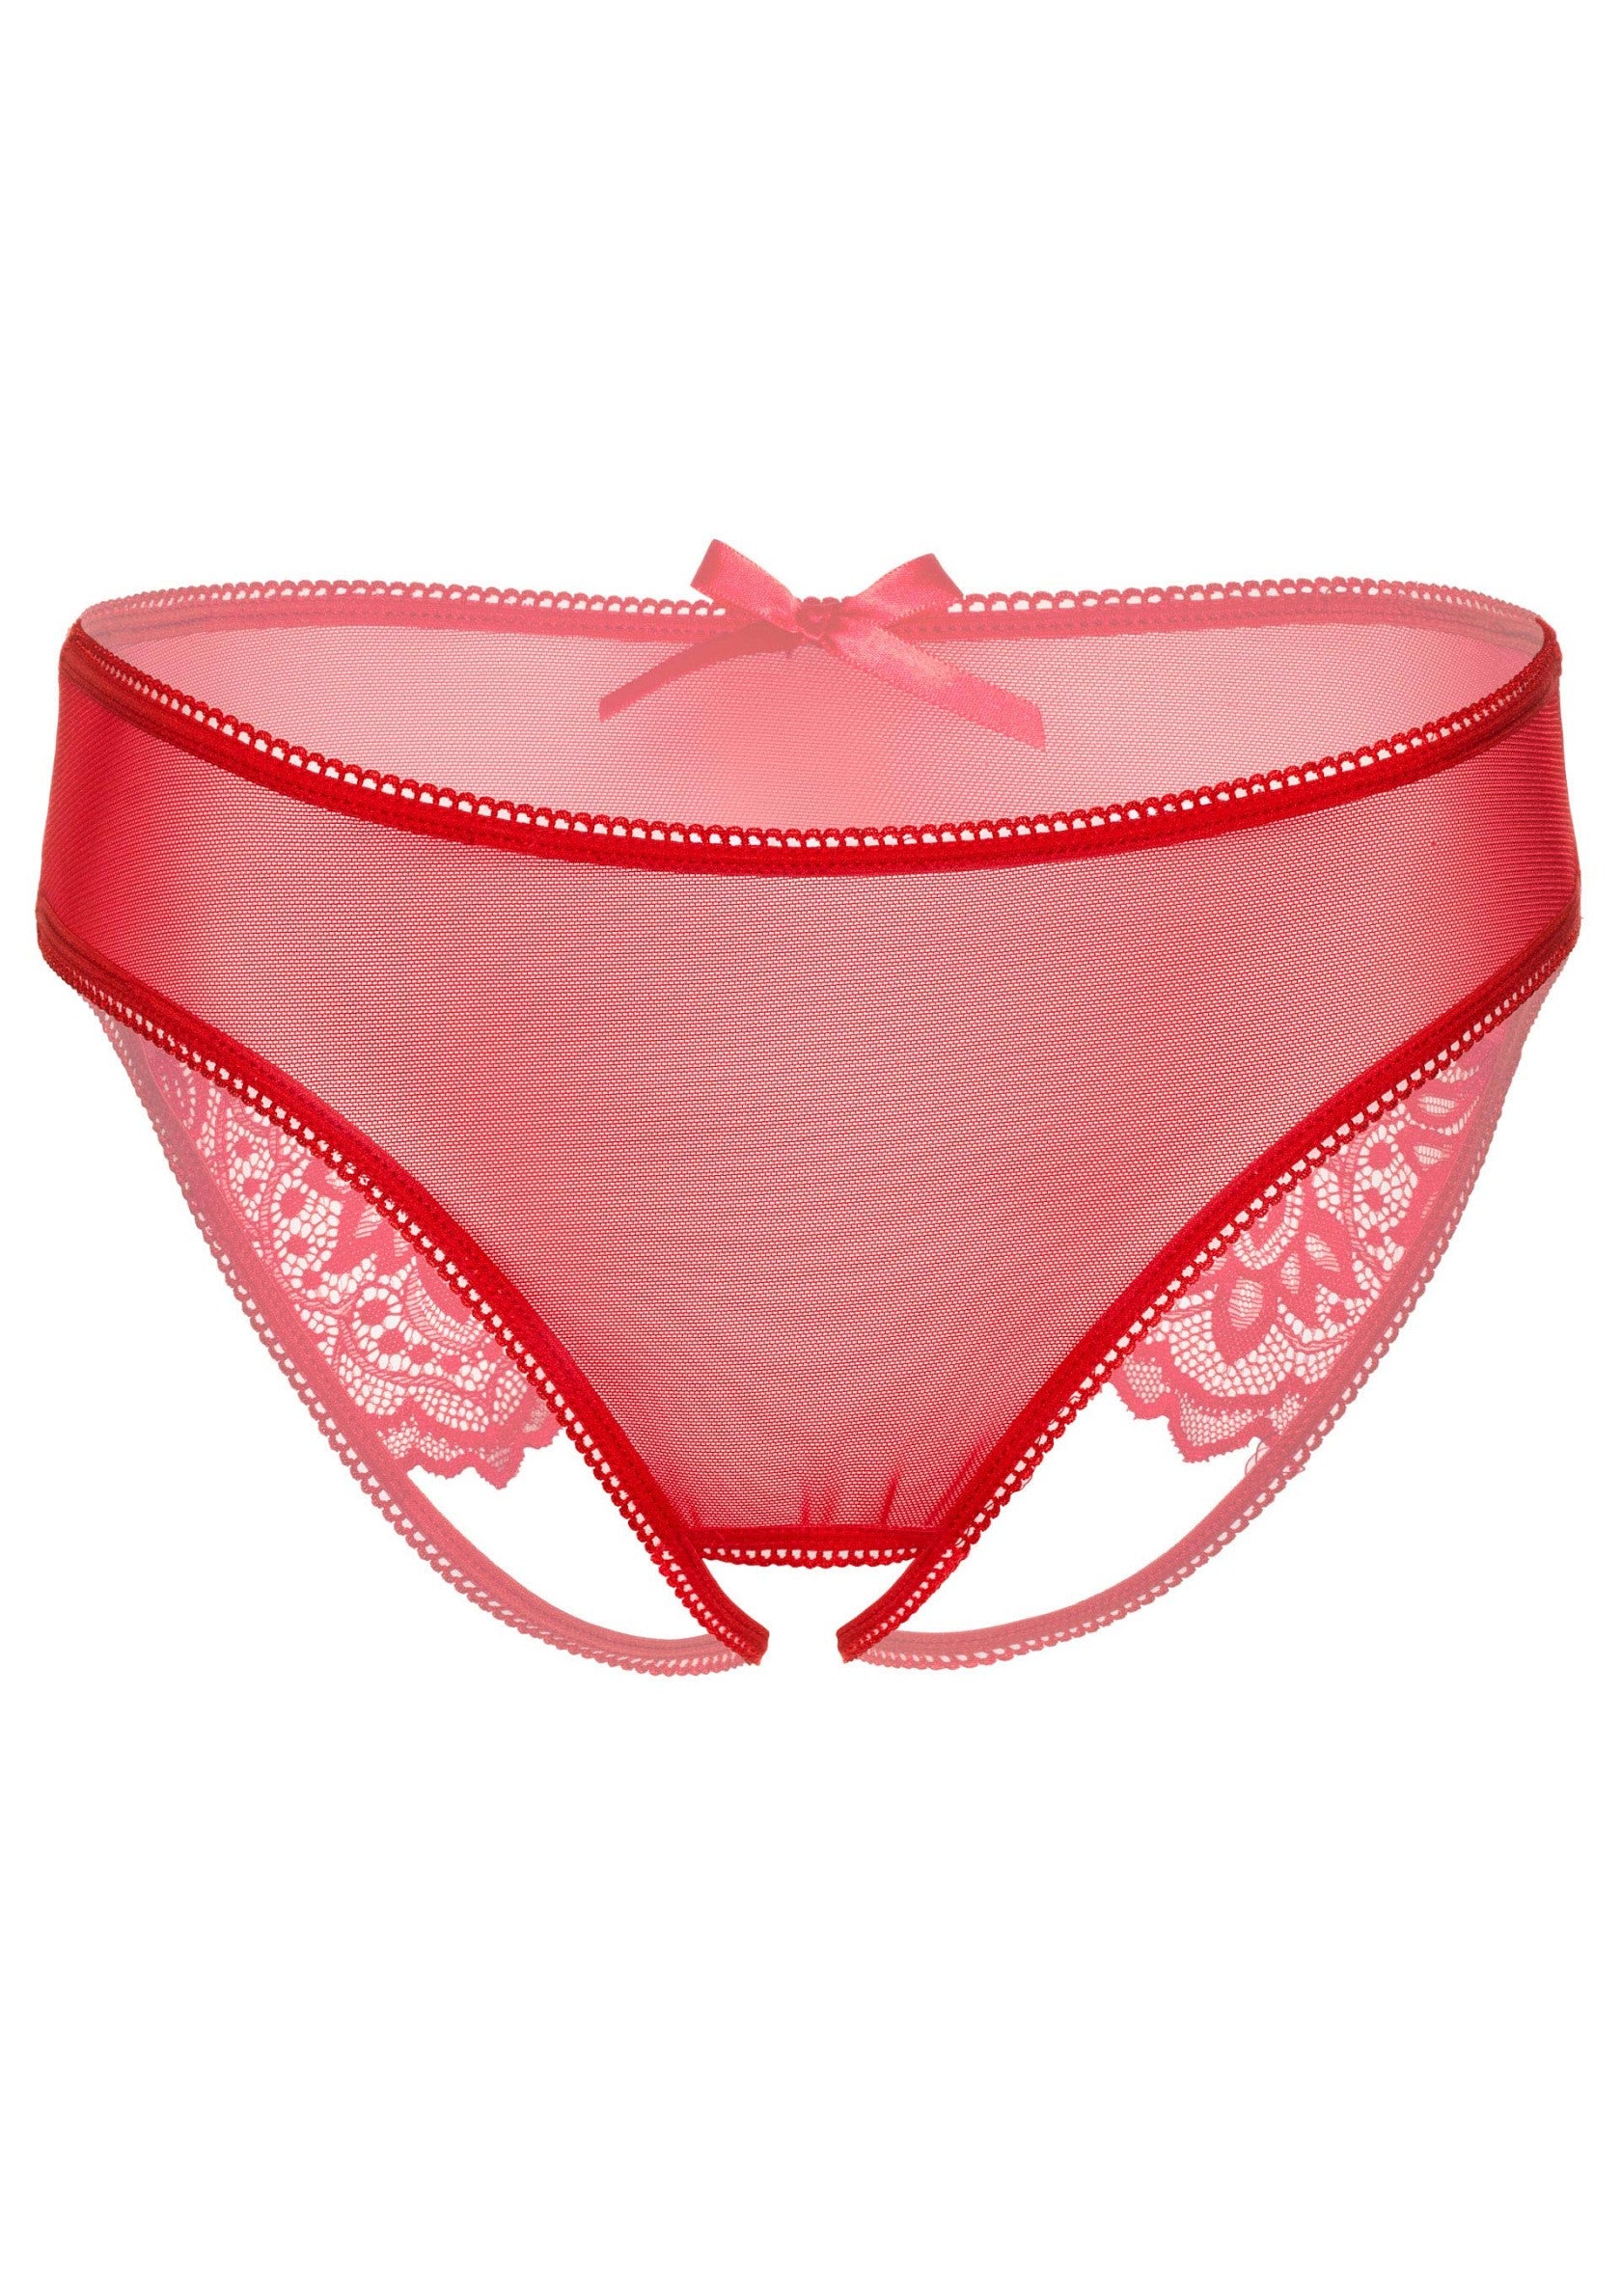 Daring Intimates Nicolette crotchless panty RED S/M - 1